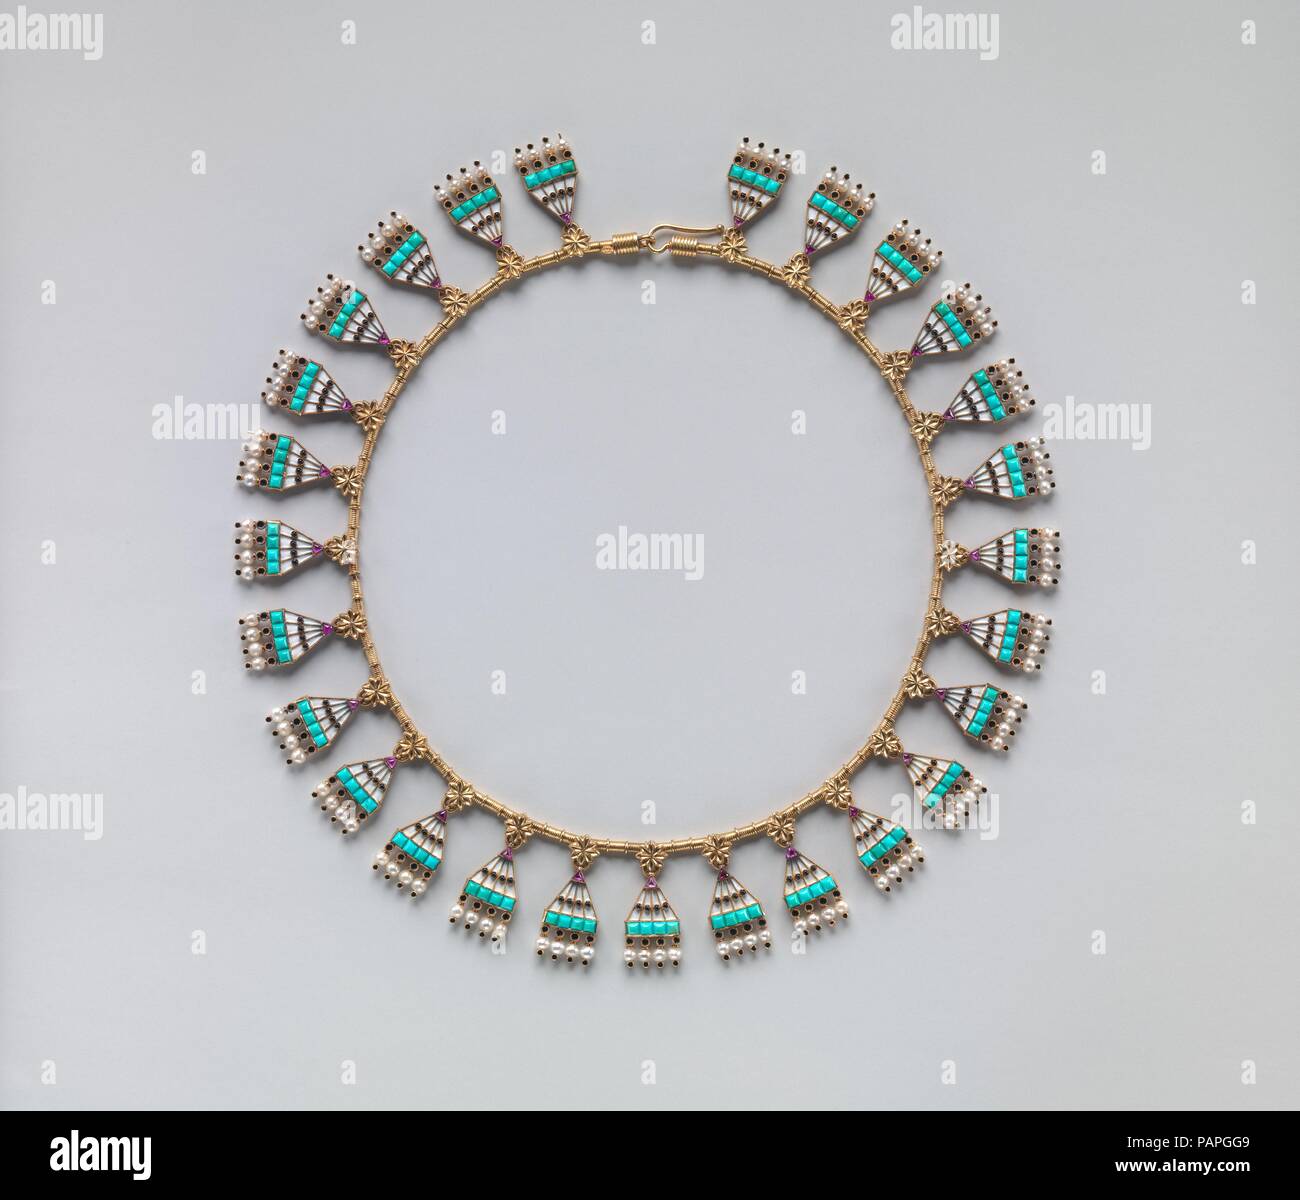 Egyptian Revival demi-parure. Culture: British. Dimensions: Necklace, confirmed: 1 × 14 in. (2.5 × 35.6 cm);  Bracelet, confirmed: 7/8 × 2 3/8 × 2 1/8 in. (2.2 × 6 × 5.4 cm);  Earring, confirmed: 2 3/16 × 1 1/16 in. (5.6 × 2.7 cm). Maker: Carlo Giuliano (Italian, active England, ca. 1831-1895). Retailer: C. F. Hancock. Date: ca. 1865.  The firm of Carlo Giuliano was one of the leading producers of archaeological-revival jewelry in the second half of the nineteenth century, and this parure in the Egyptian taste reflects one of the many historical styles in which the Giuliano firm worked. It is  Stock Photo